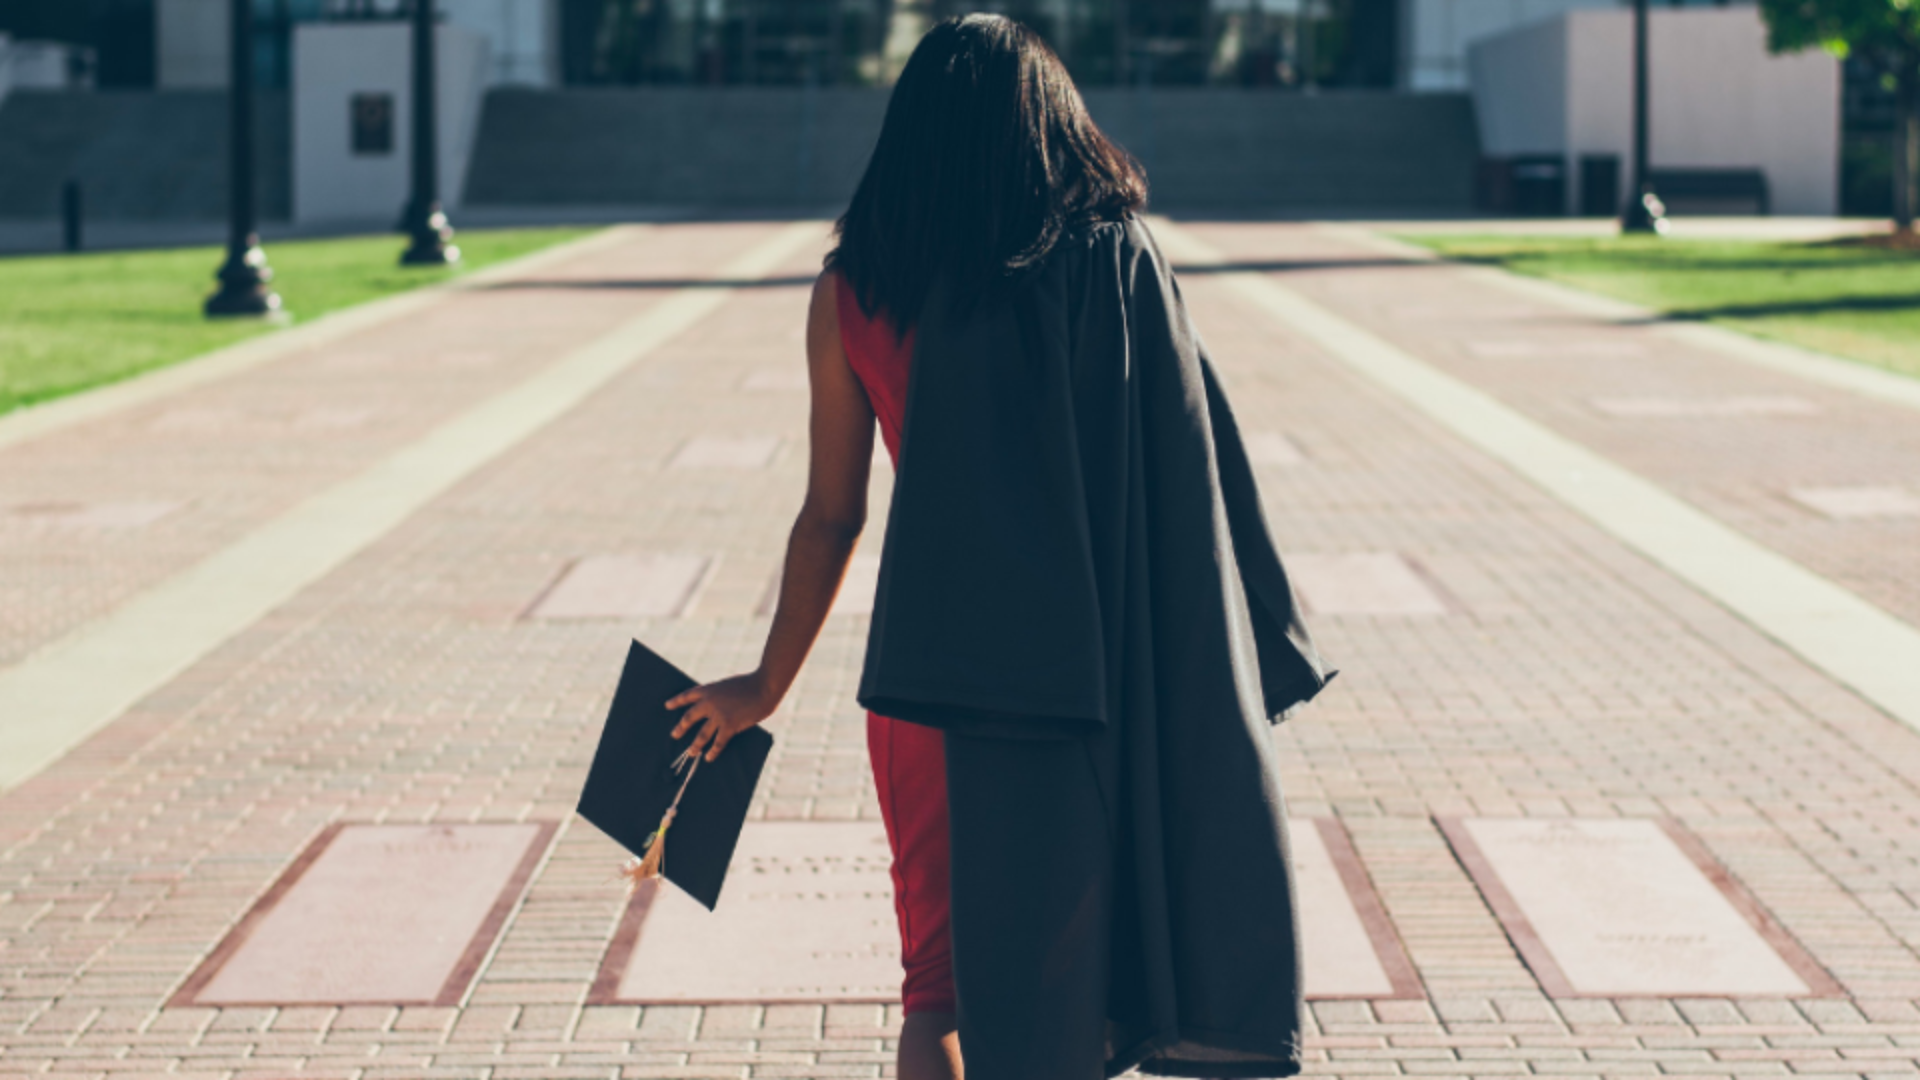 girl wearing a red dress and her black graduation gown draped over her right shoulder as she walks away from the camera while holding her graduation cap in her left hand